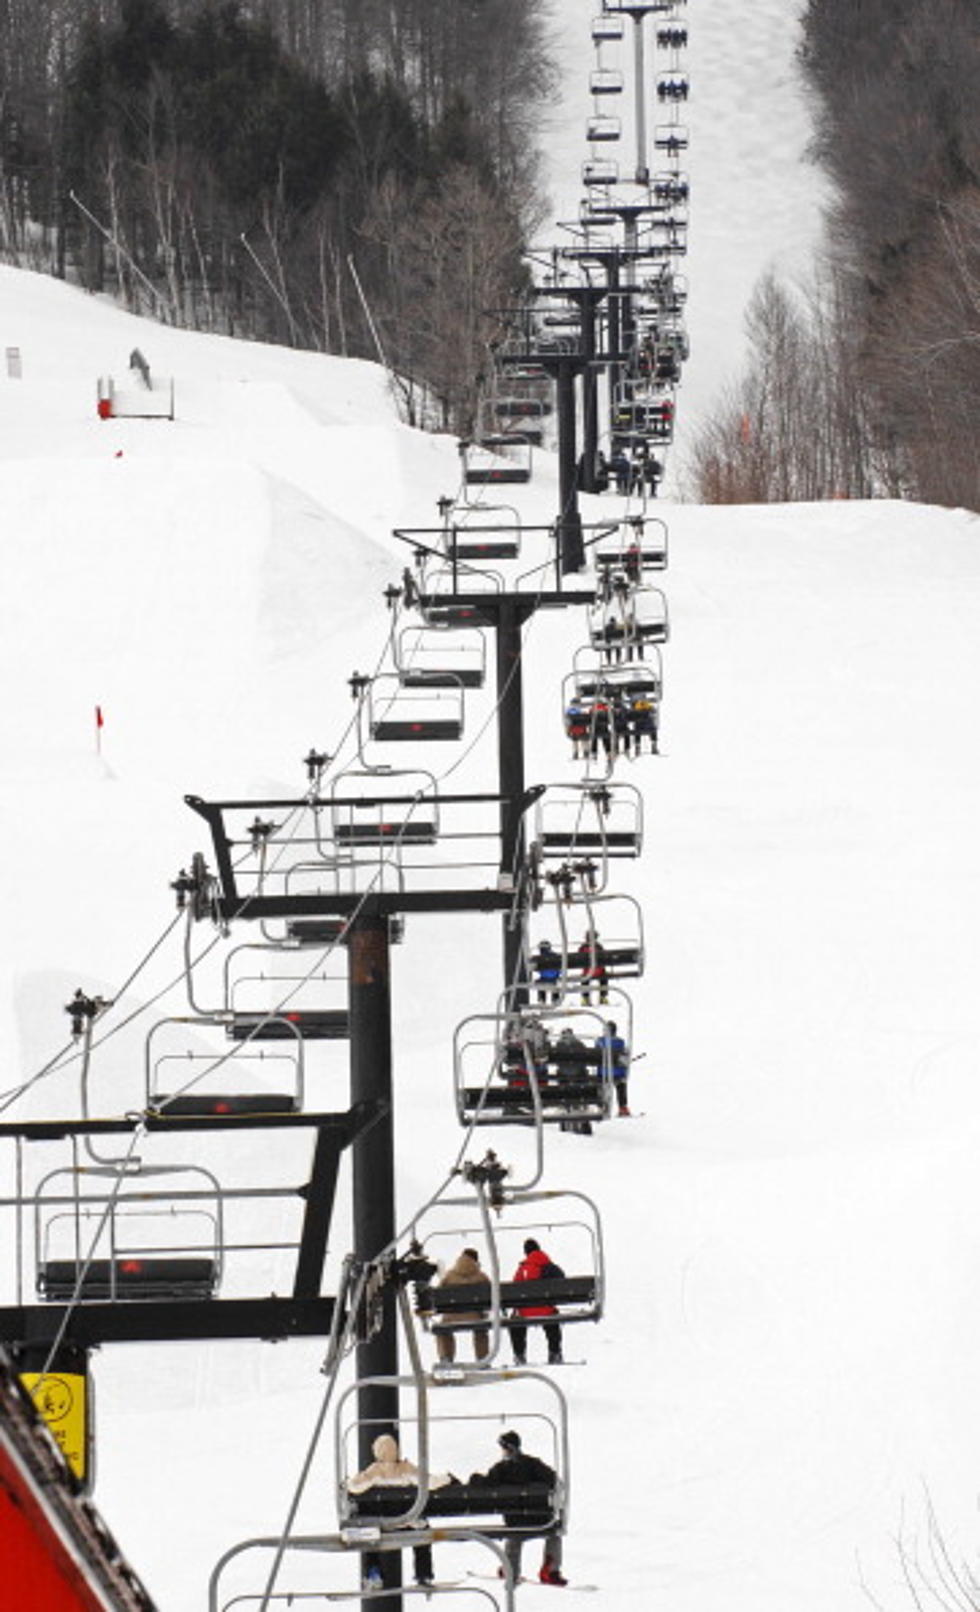 Ski Season is Now Officially Way Under Way in Maine and N.H. [PHOTOS]